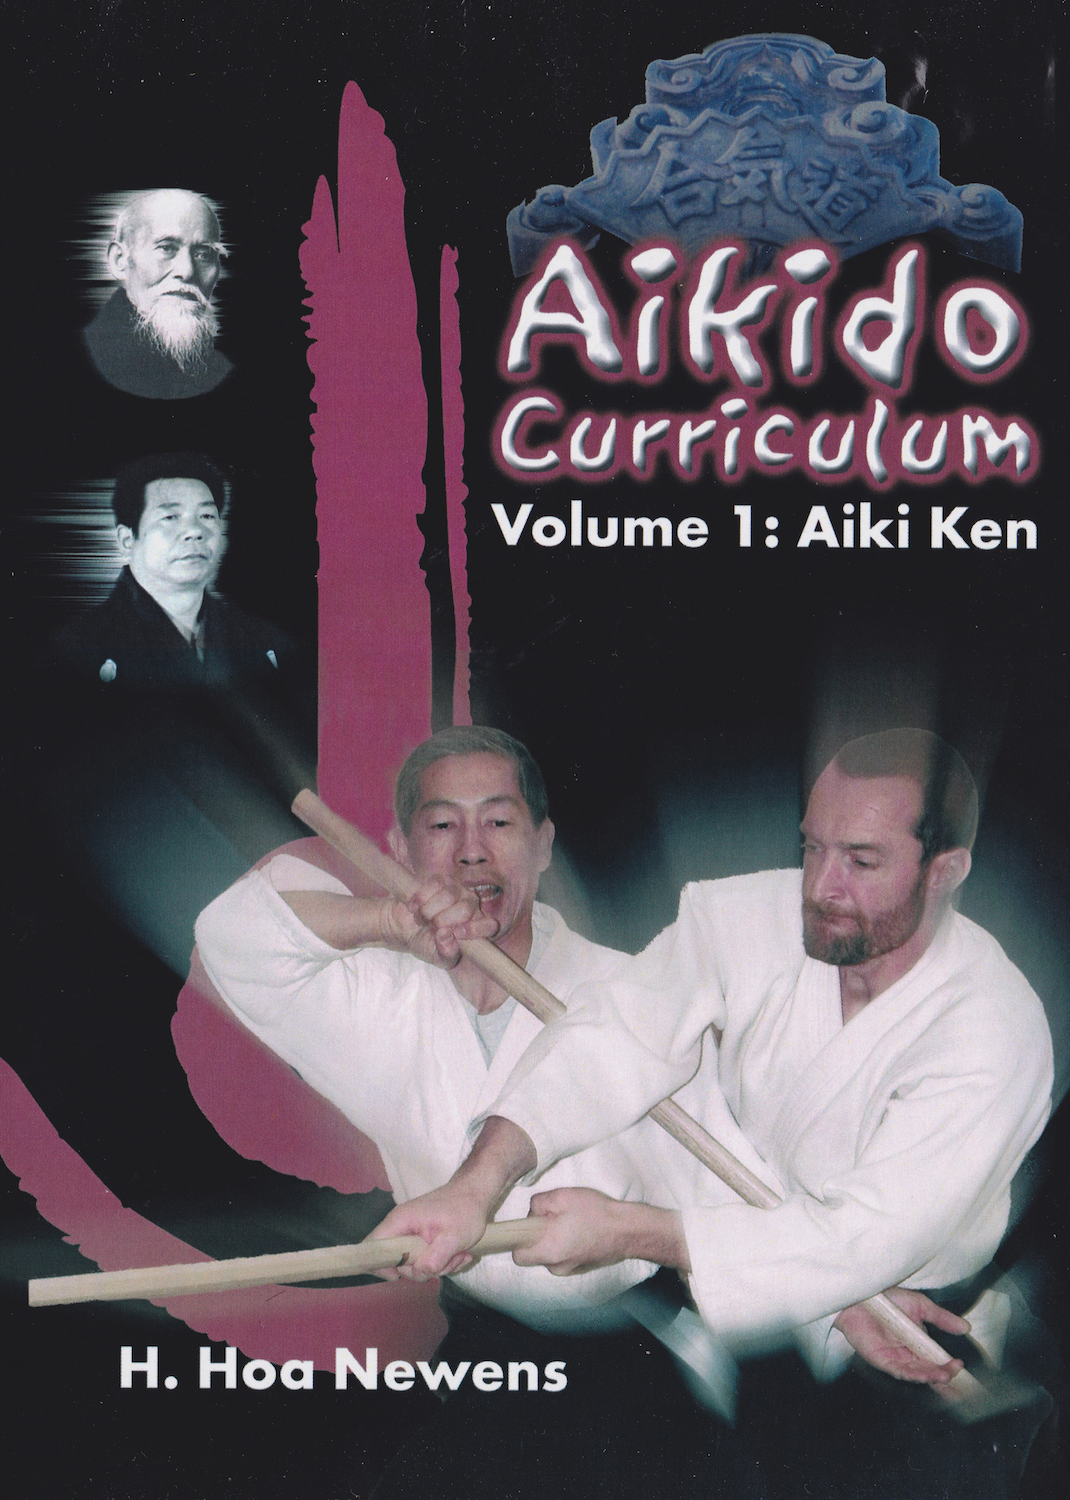 Aikido Curriculum DVD 1: Aiki Ken by Hoa Newens (Preowned) - Budovideos